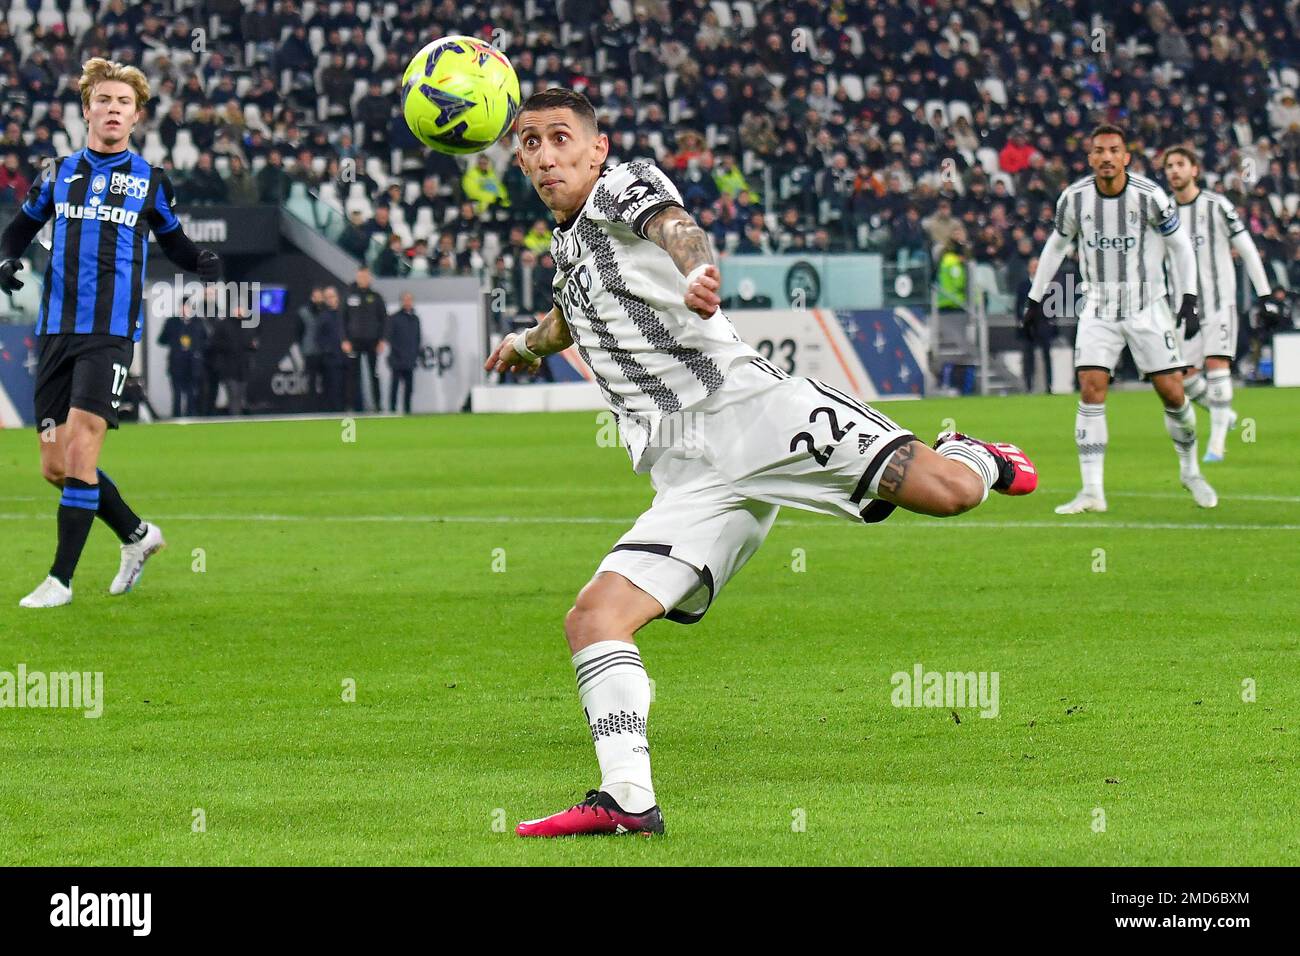 Torino, Italy. 22nd Jan, 2023. Angel Di Maria of Juventus FC in action during the Serie A football match between Juventus FC and Atalanta BC at Juventus stadium in Torino (Italy), January 22th, 2022. Photo Giuliano Marchisciano/Insidefoto Credit: Insidefoto di andrea staccioli/Alamy Live News Stock Photo